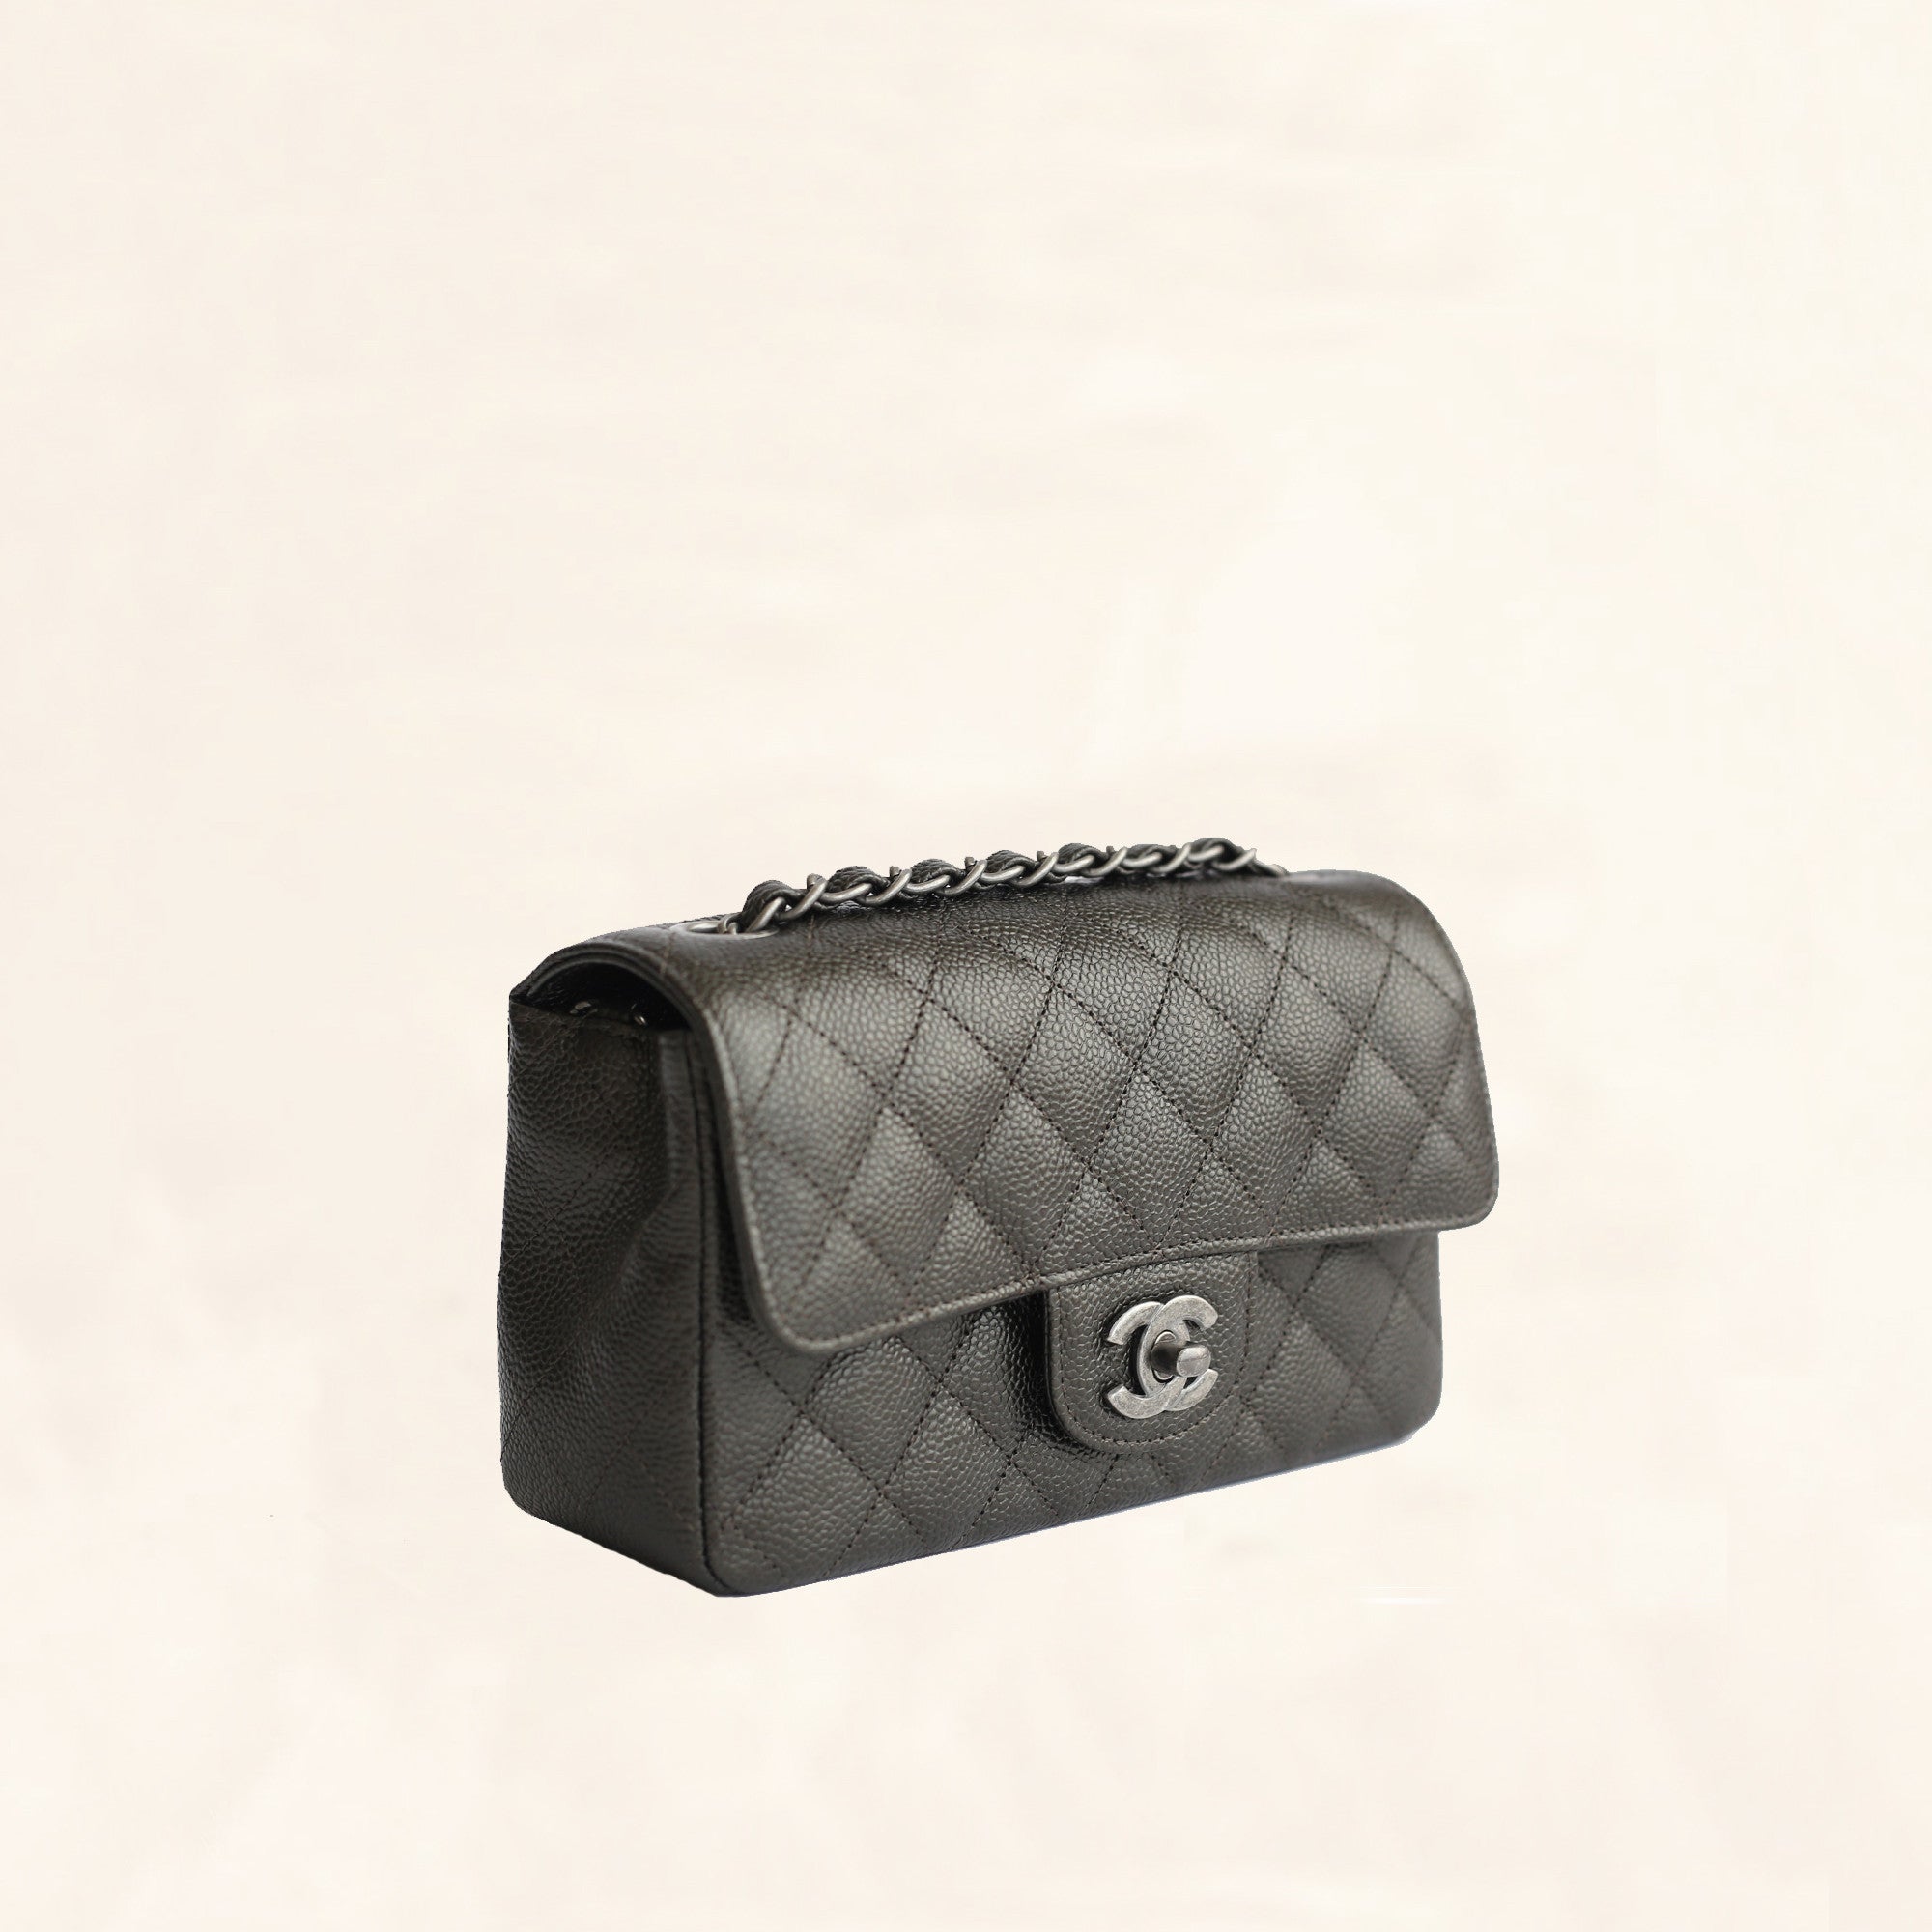 How to Clean, Store and Care for Your Chanel Bag